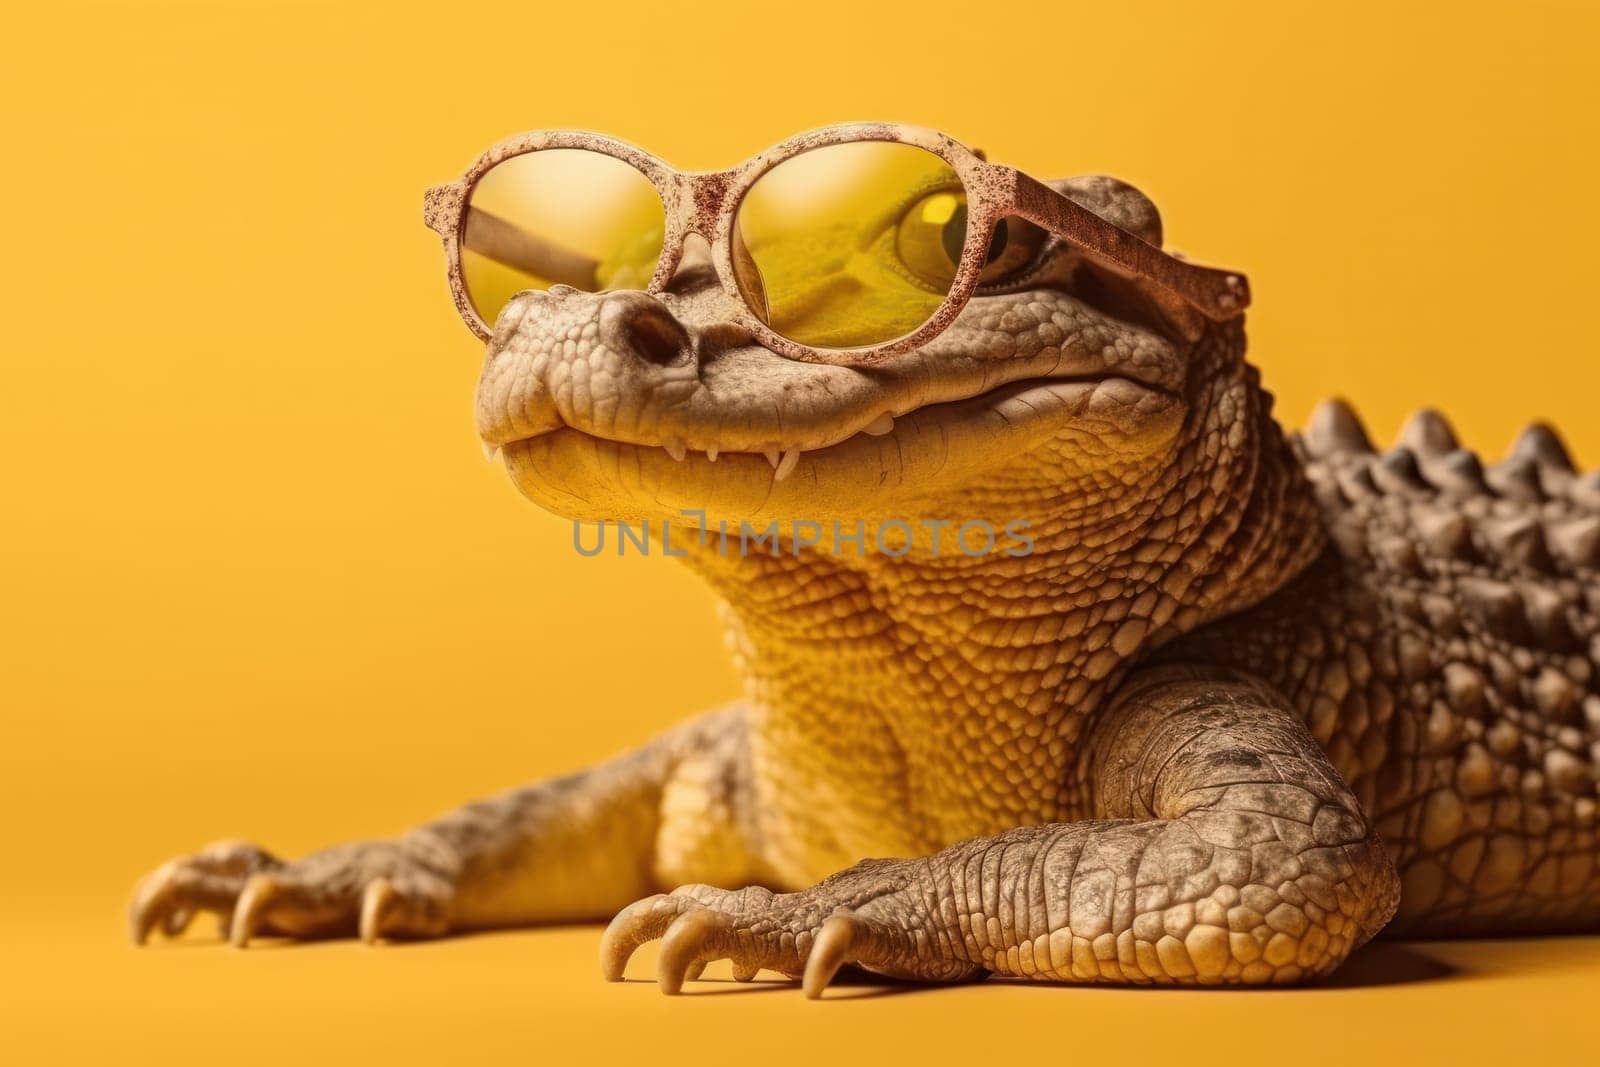 Admire the wild beauty of this crocodile in sunglasses up close by Sorapop